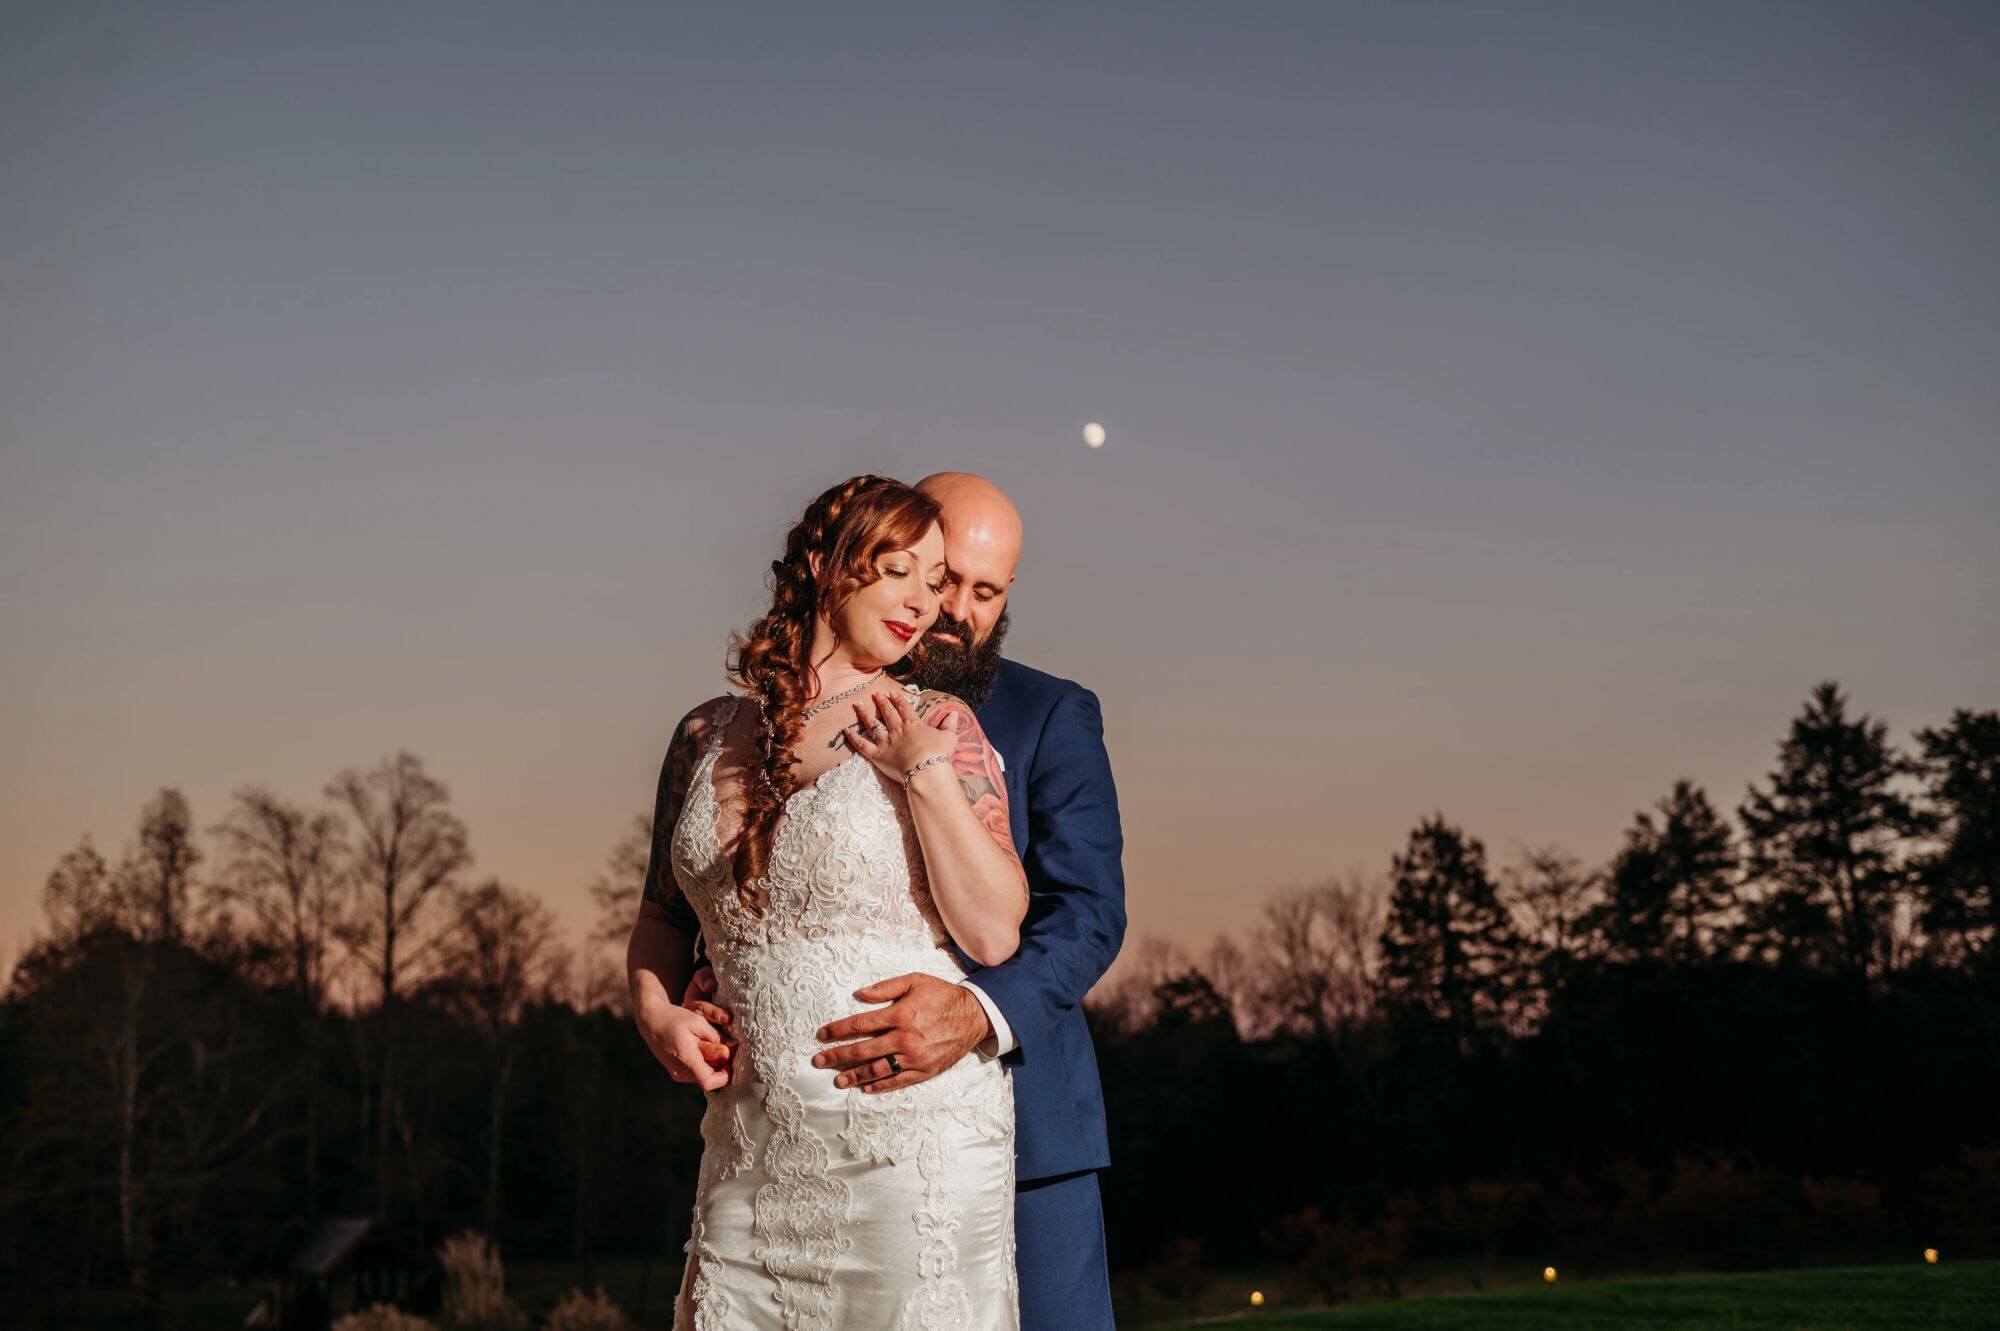 groom hugging bride's back at dusk with the moon showing in the background